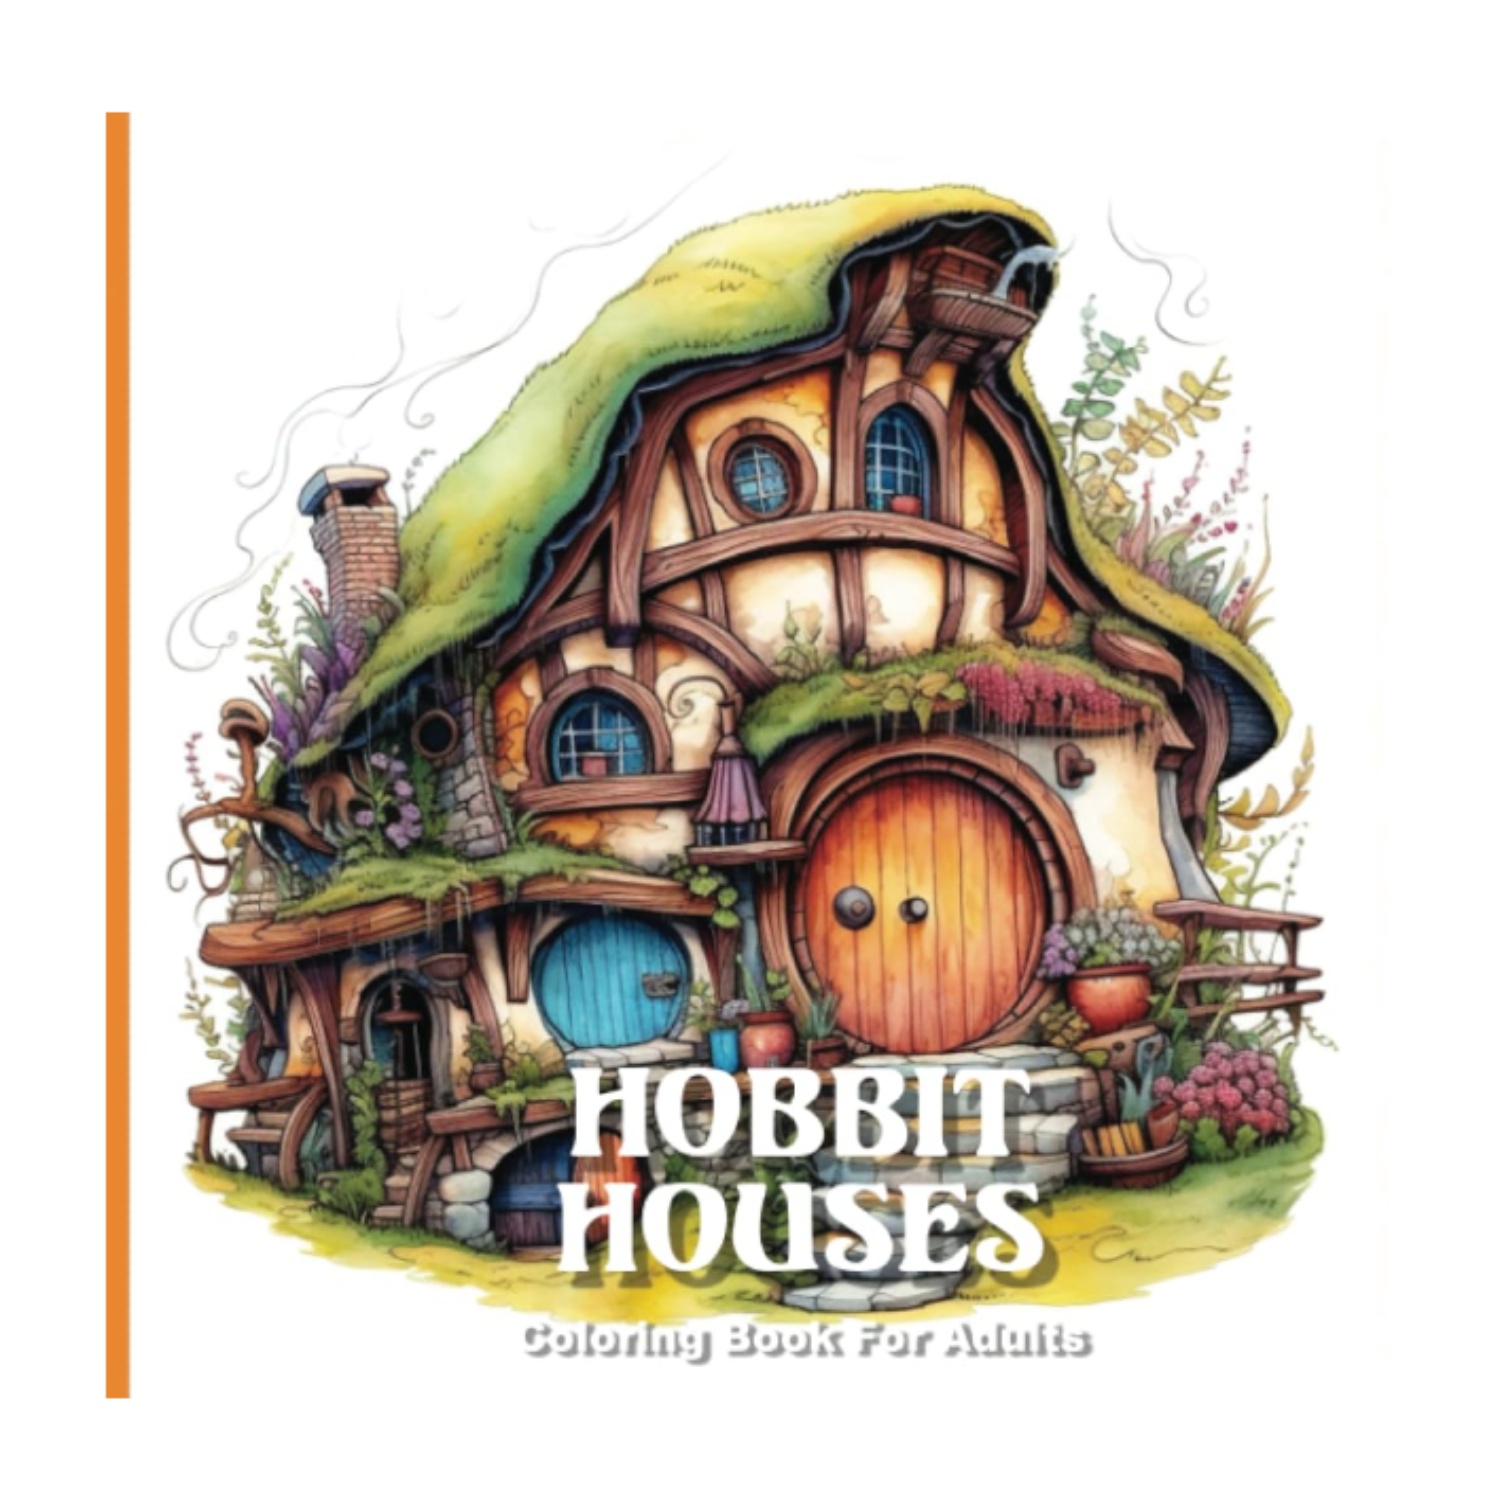 Hobbit Houses- A Coloring Book for Adults